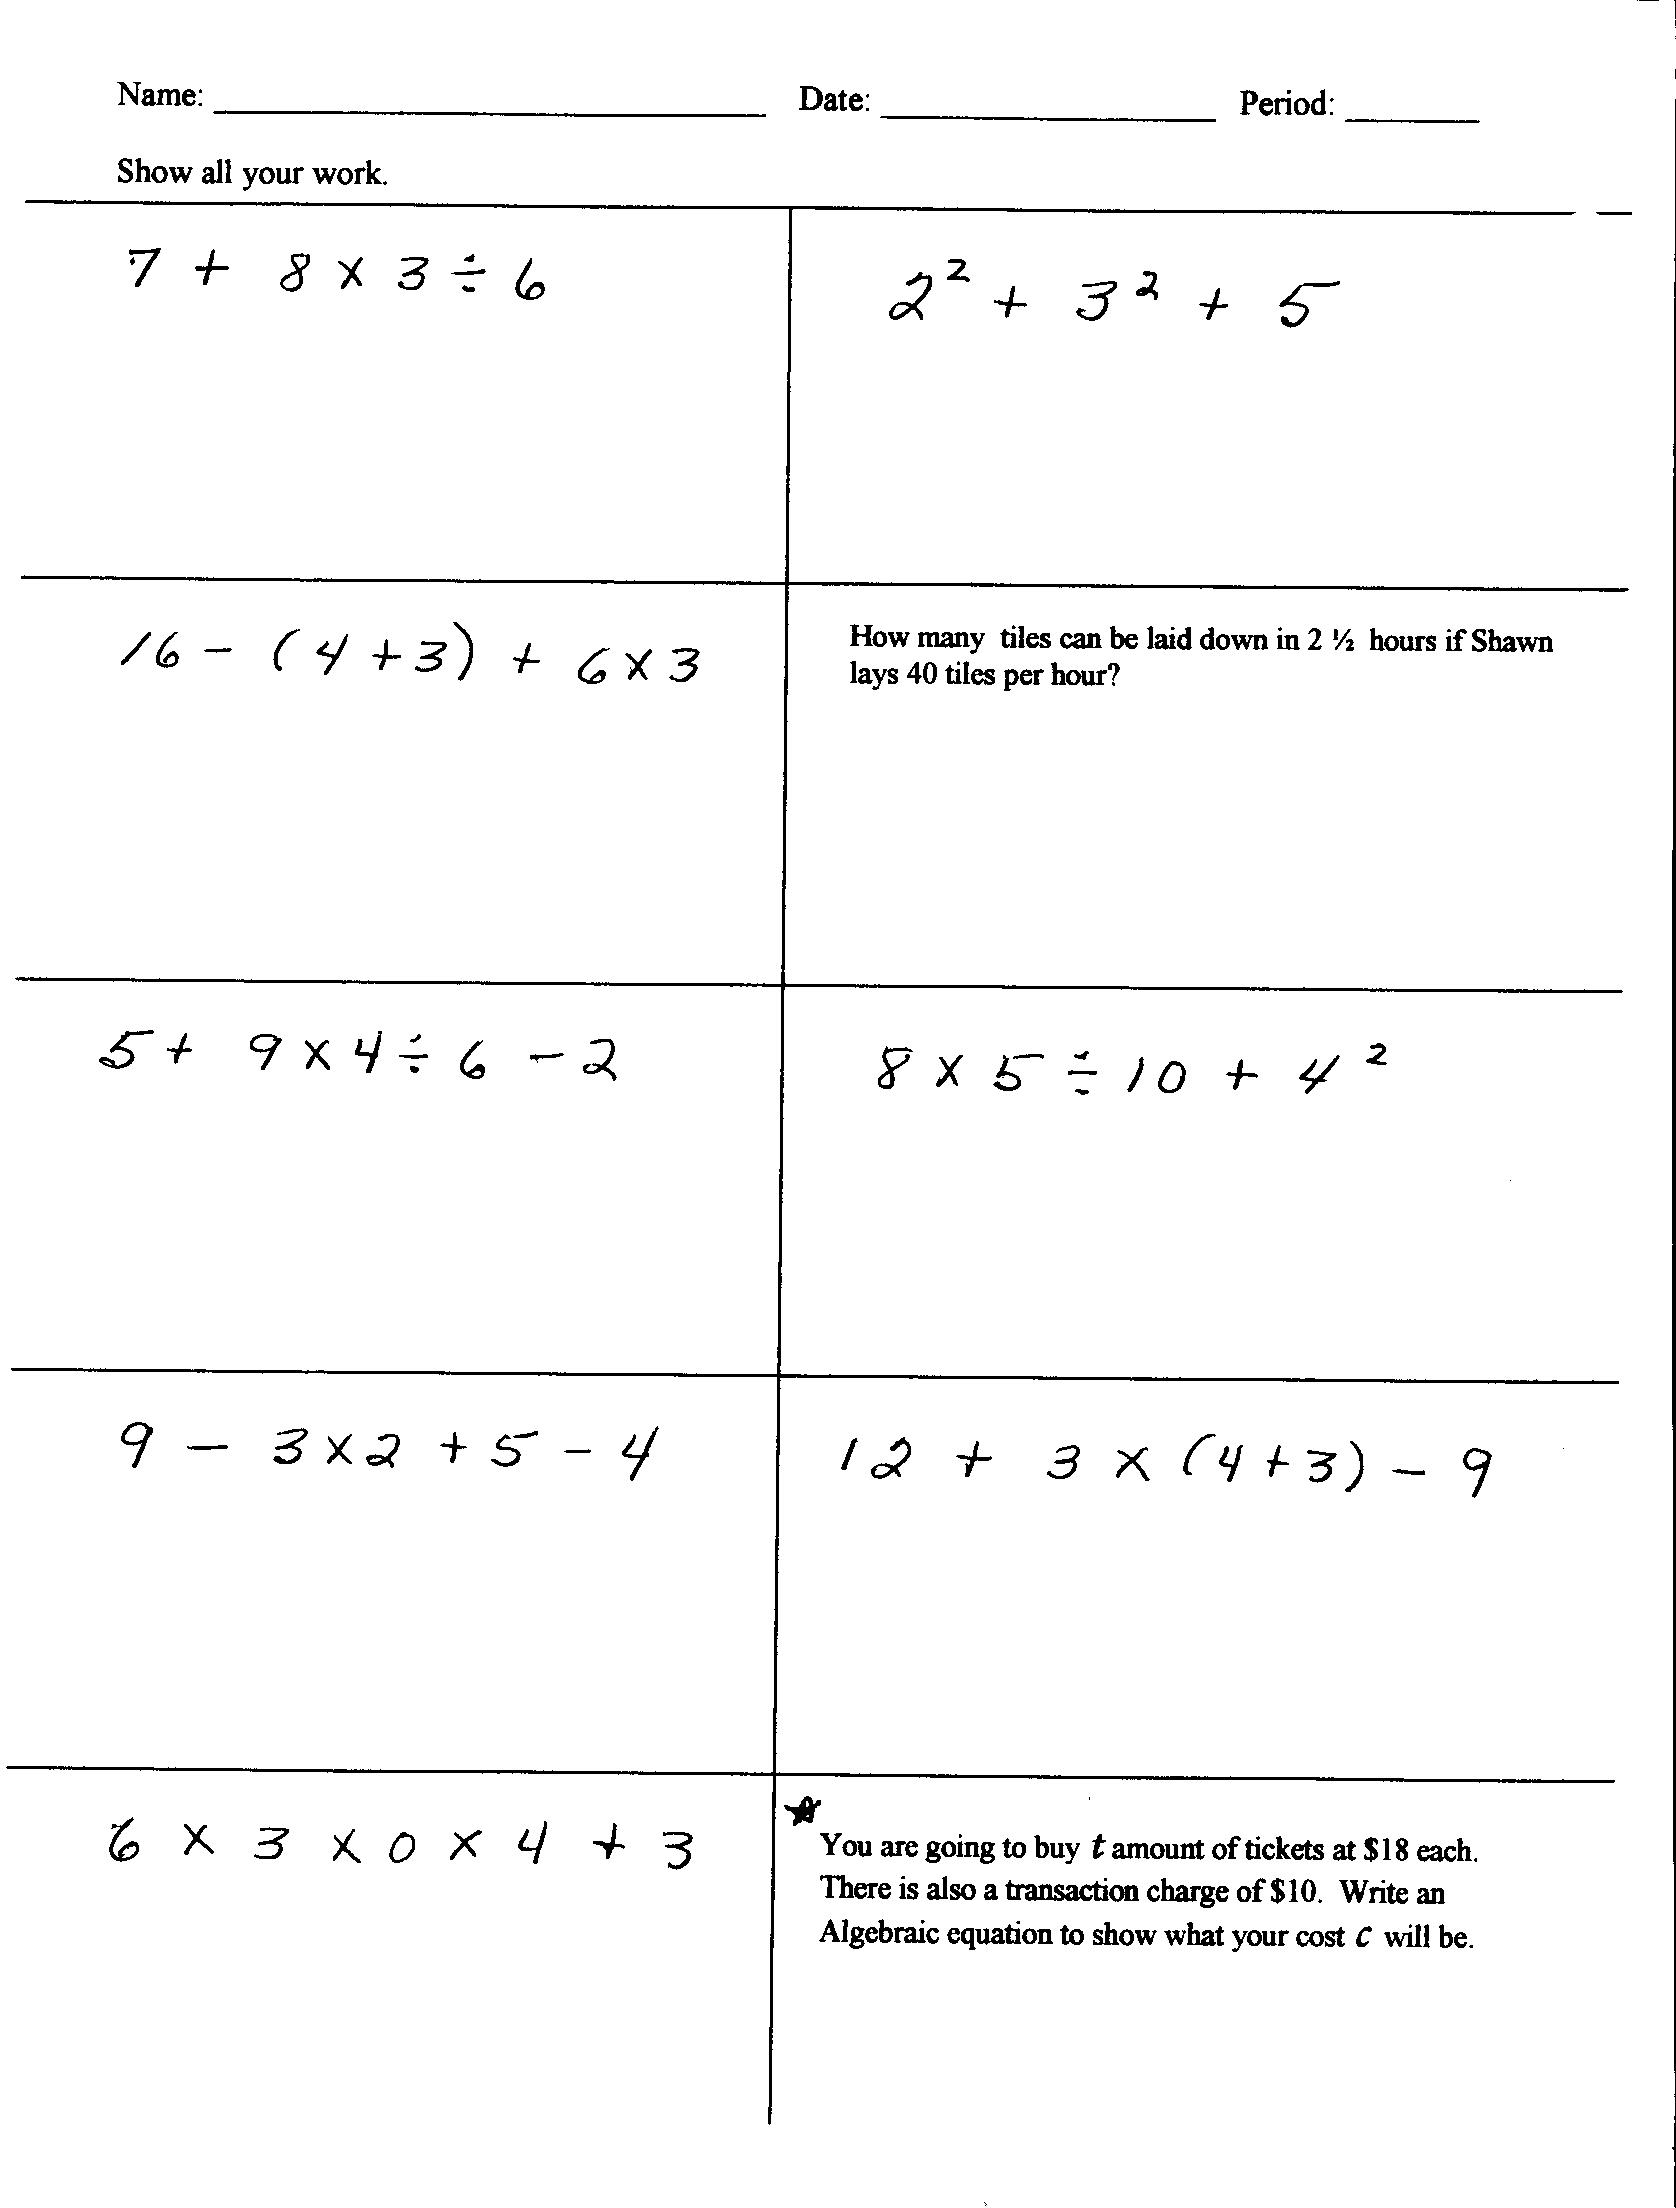 hard-math-problems-for-6th-graders